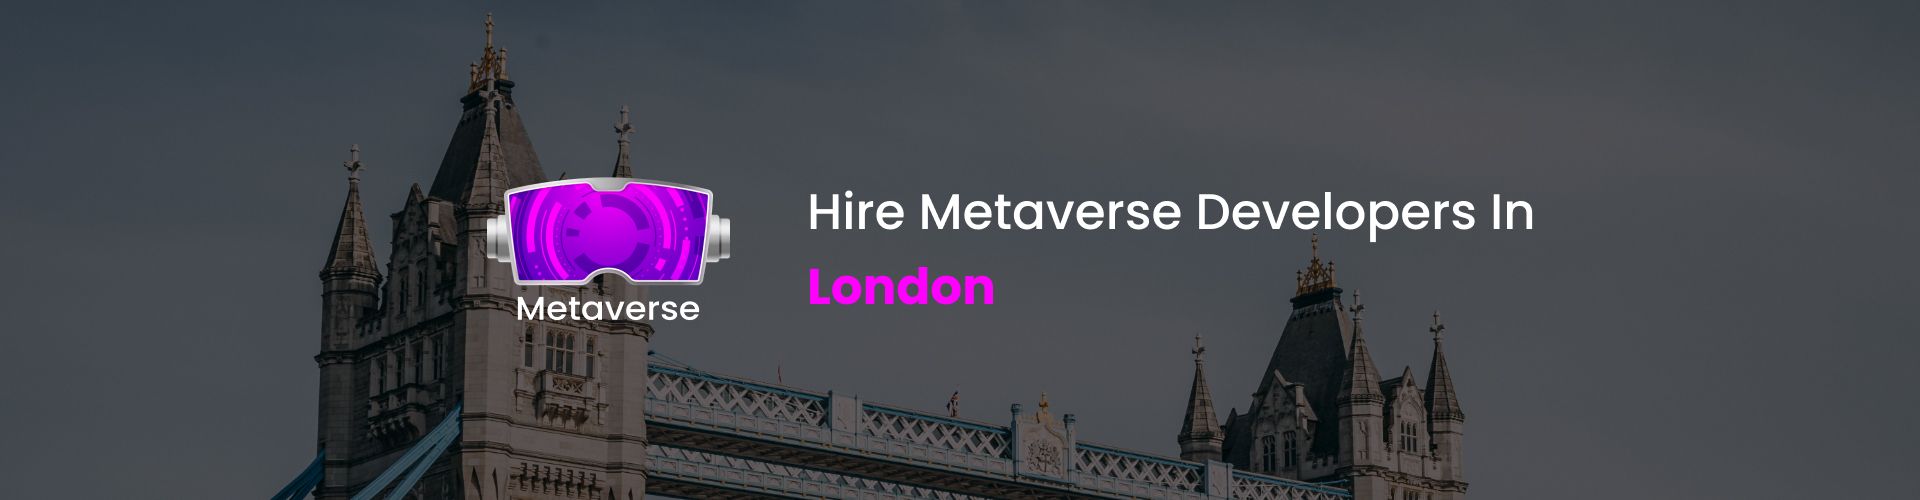 hire metaverse developers in london